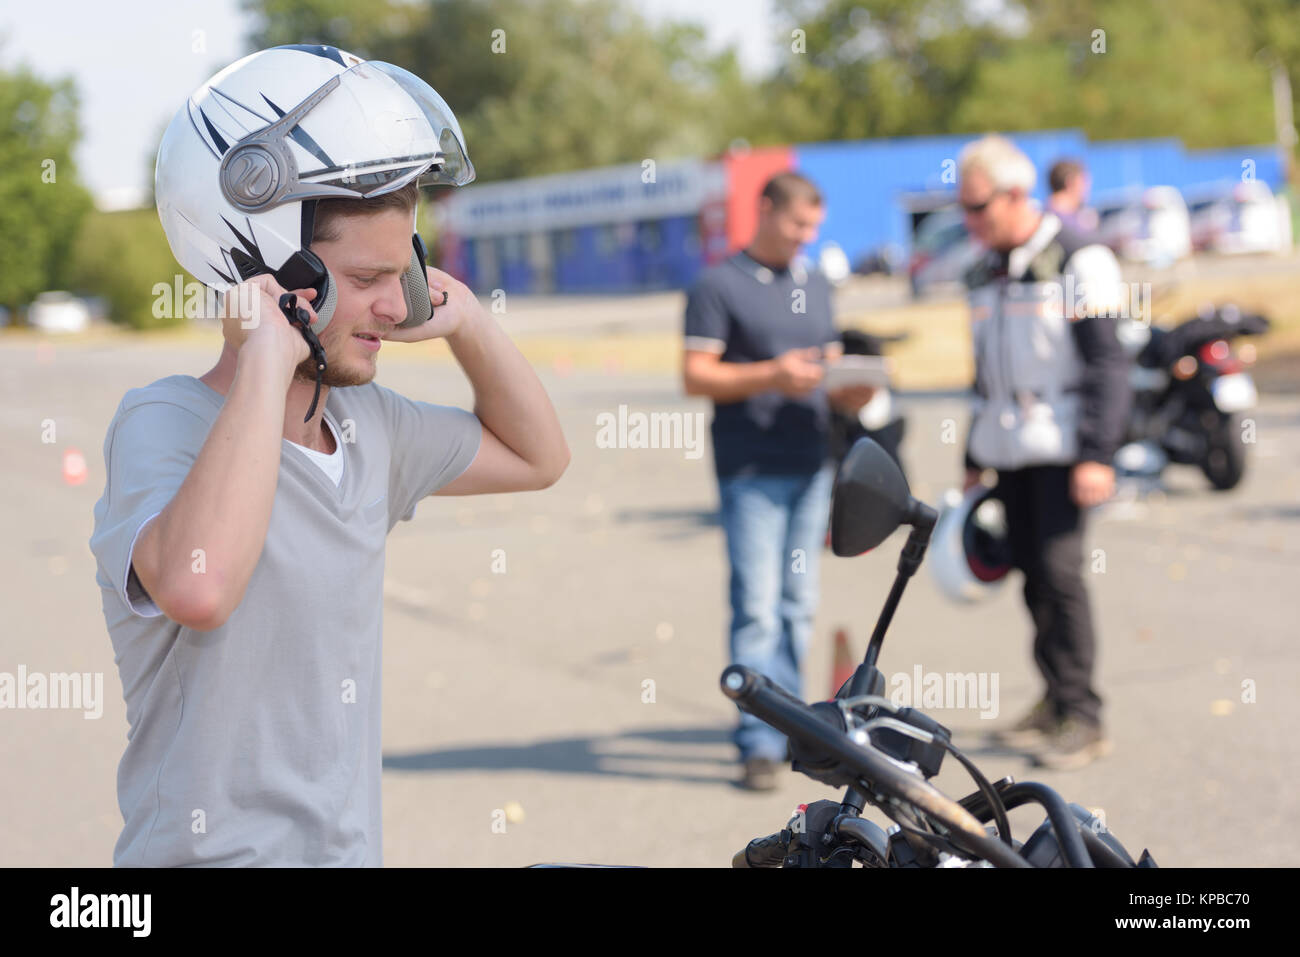 young man learning how to ride a motorbike Stock Photo